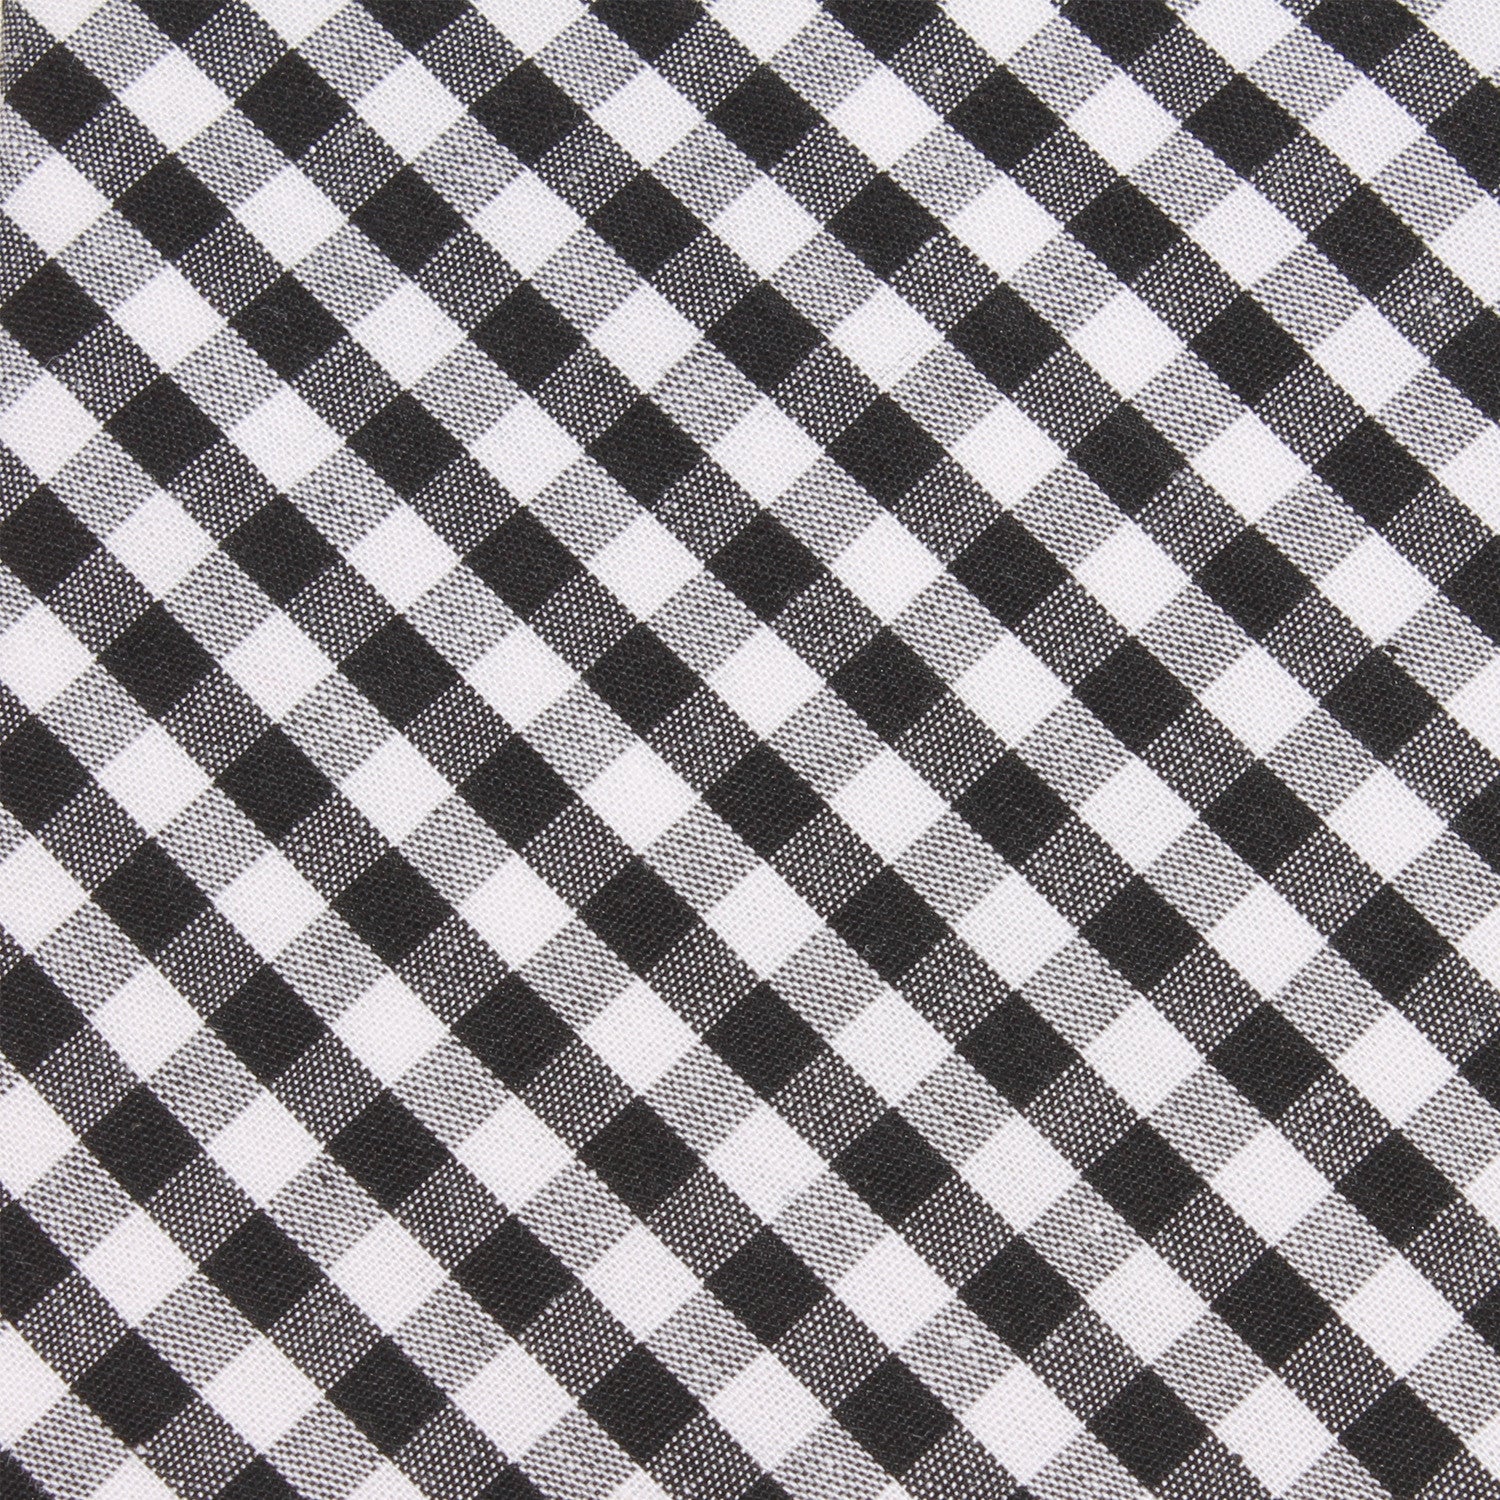 Black and White Gingham Cotton Fabric Self Tie Bow Tie C024